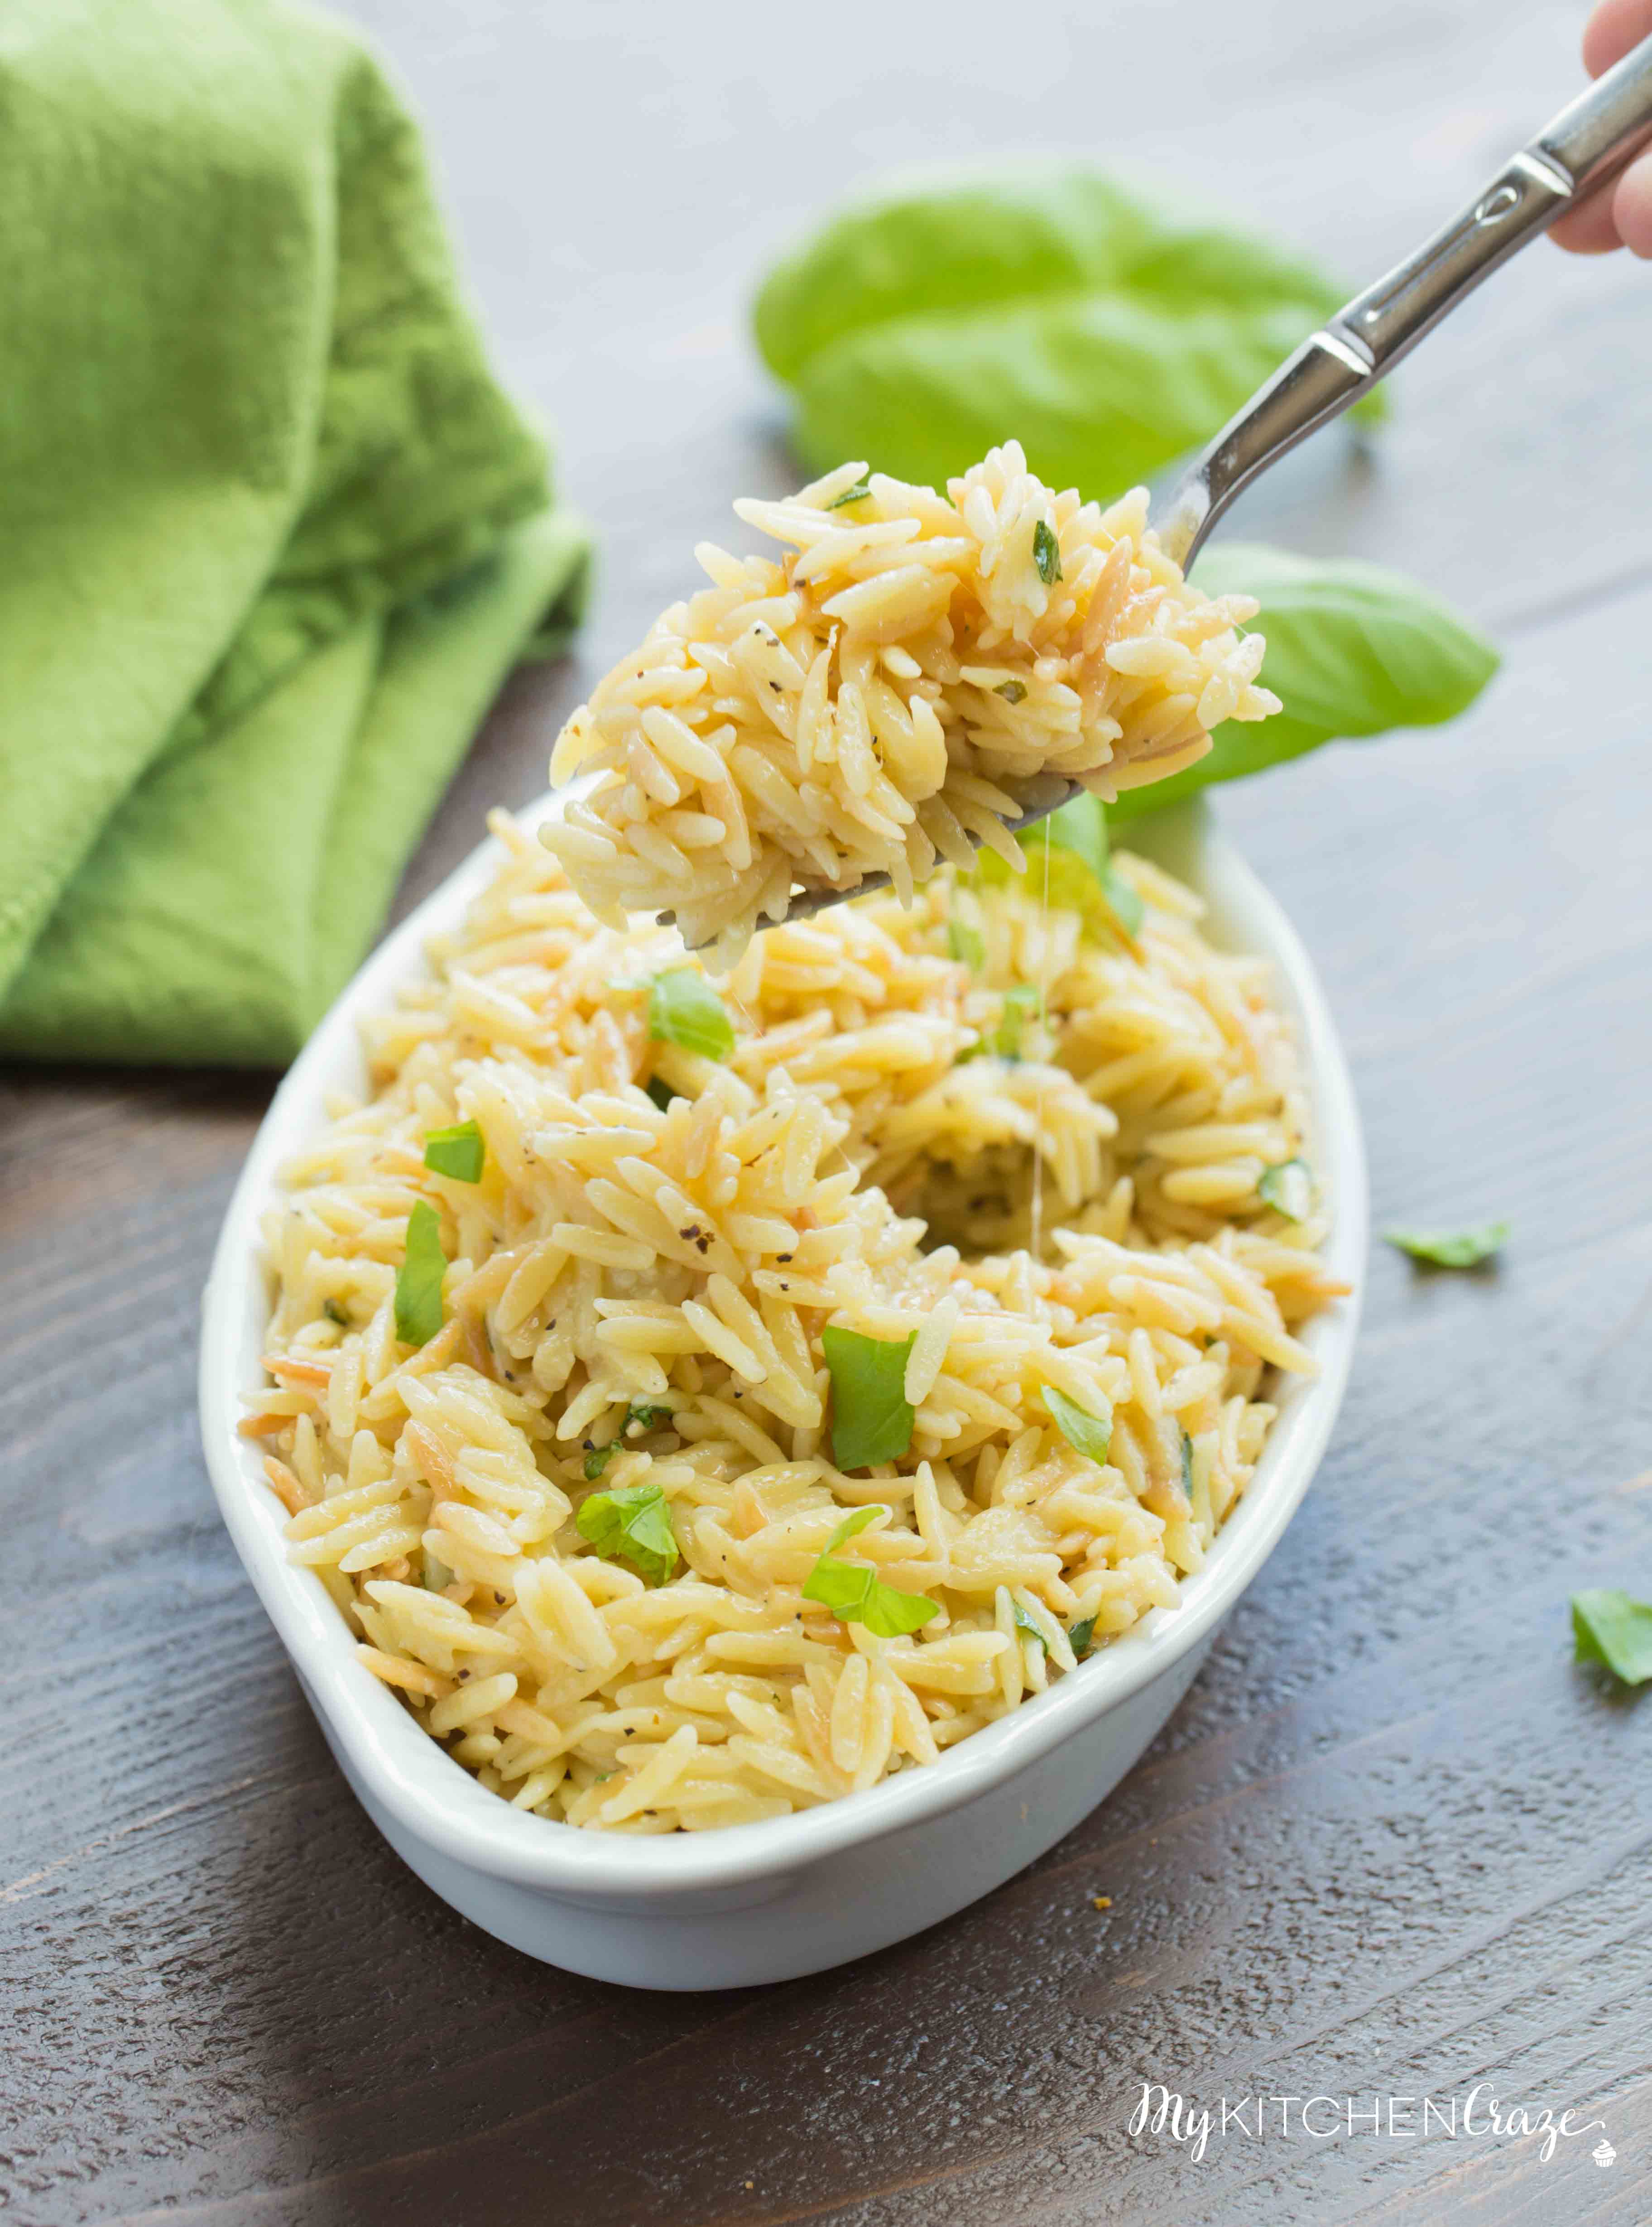 Cheesy Basil Orzo ~ Only 6 ingredients are all you need to make this fresh pasta side recipe. The cheese and basil brighten the dish making it perfect for any main.